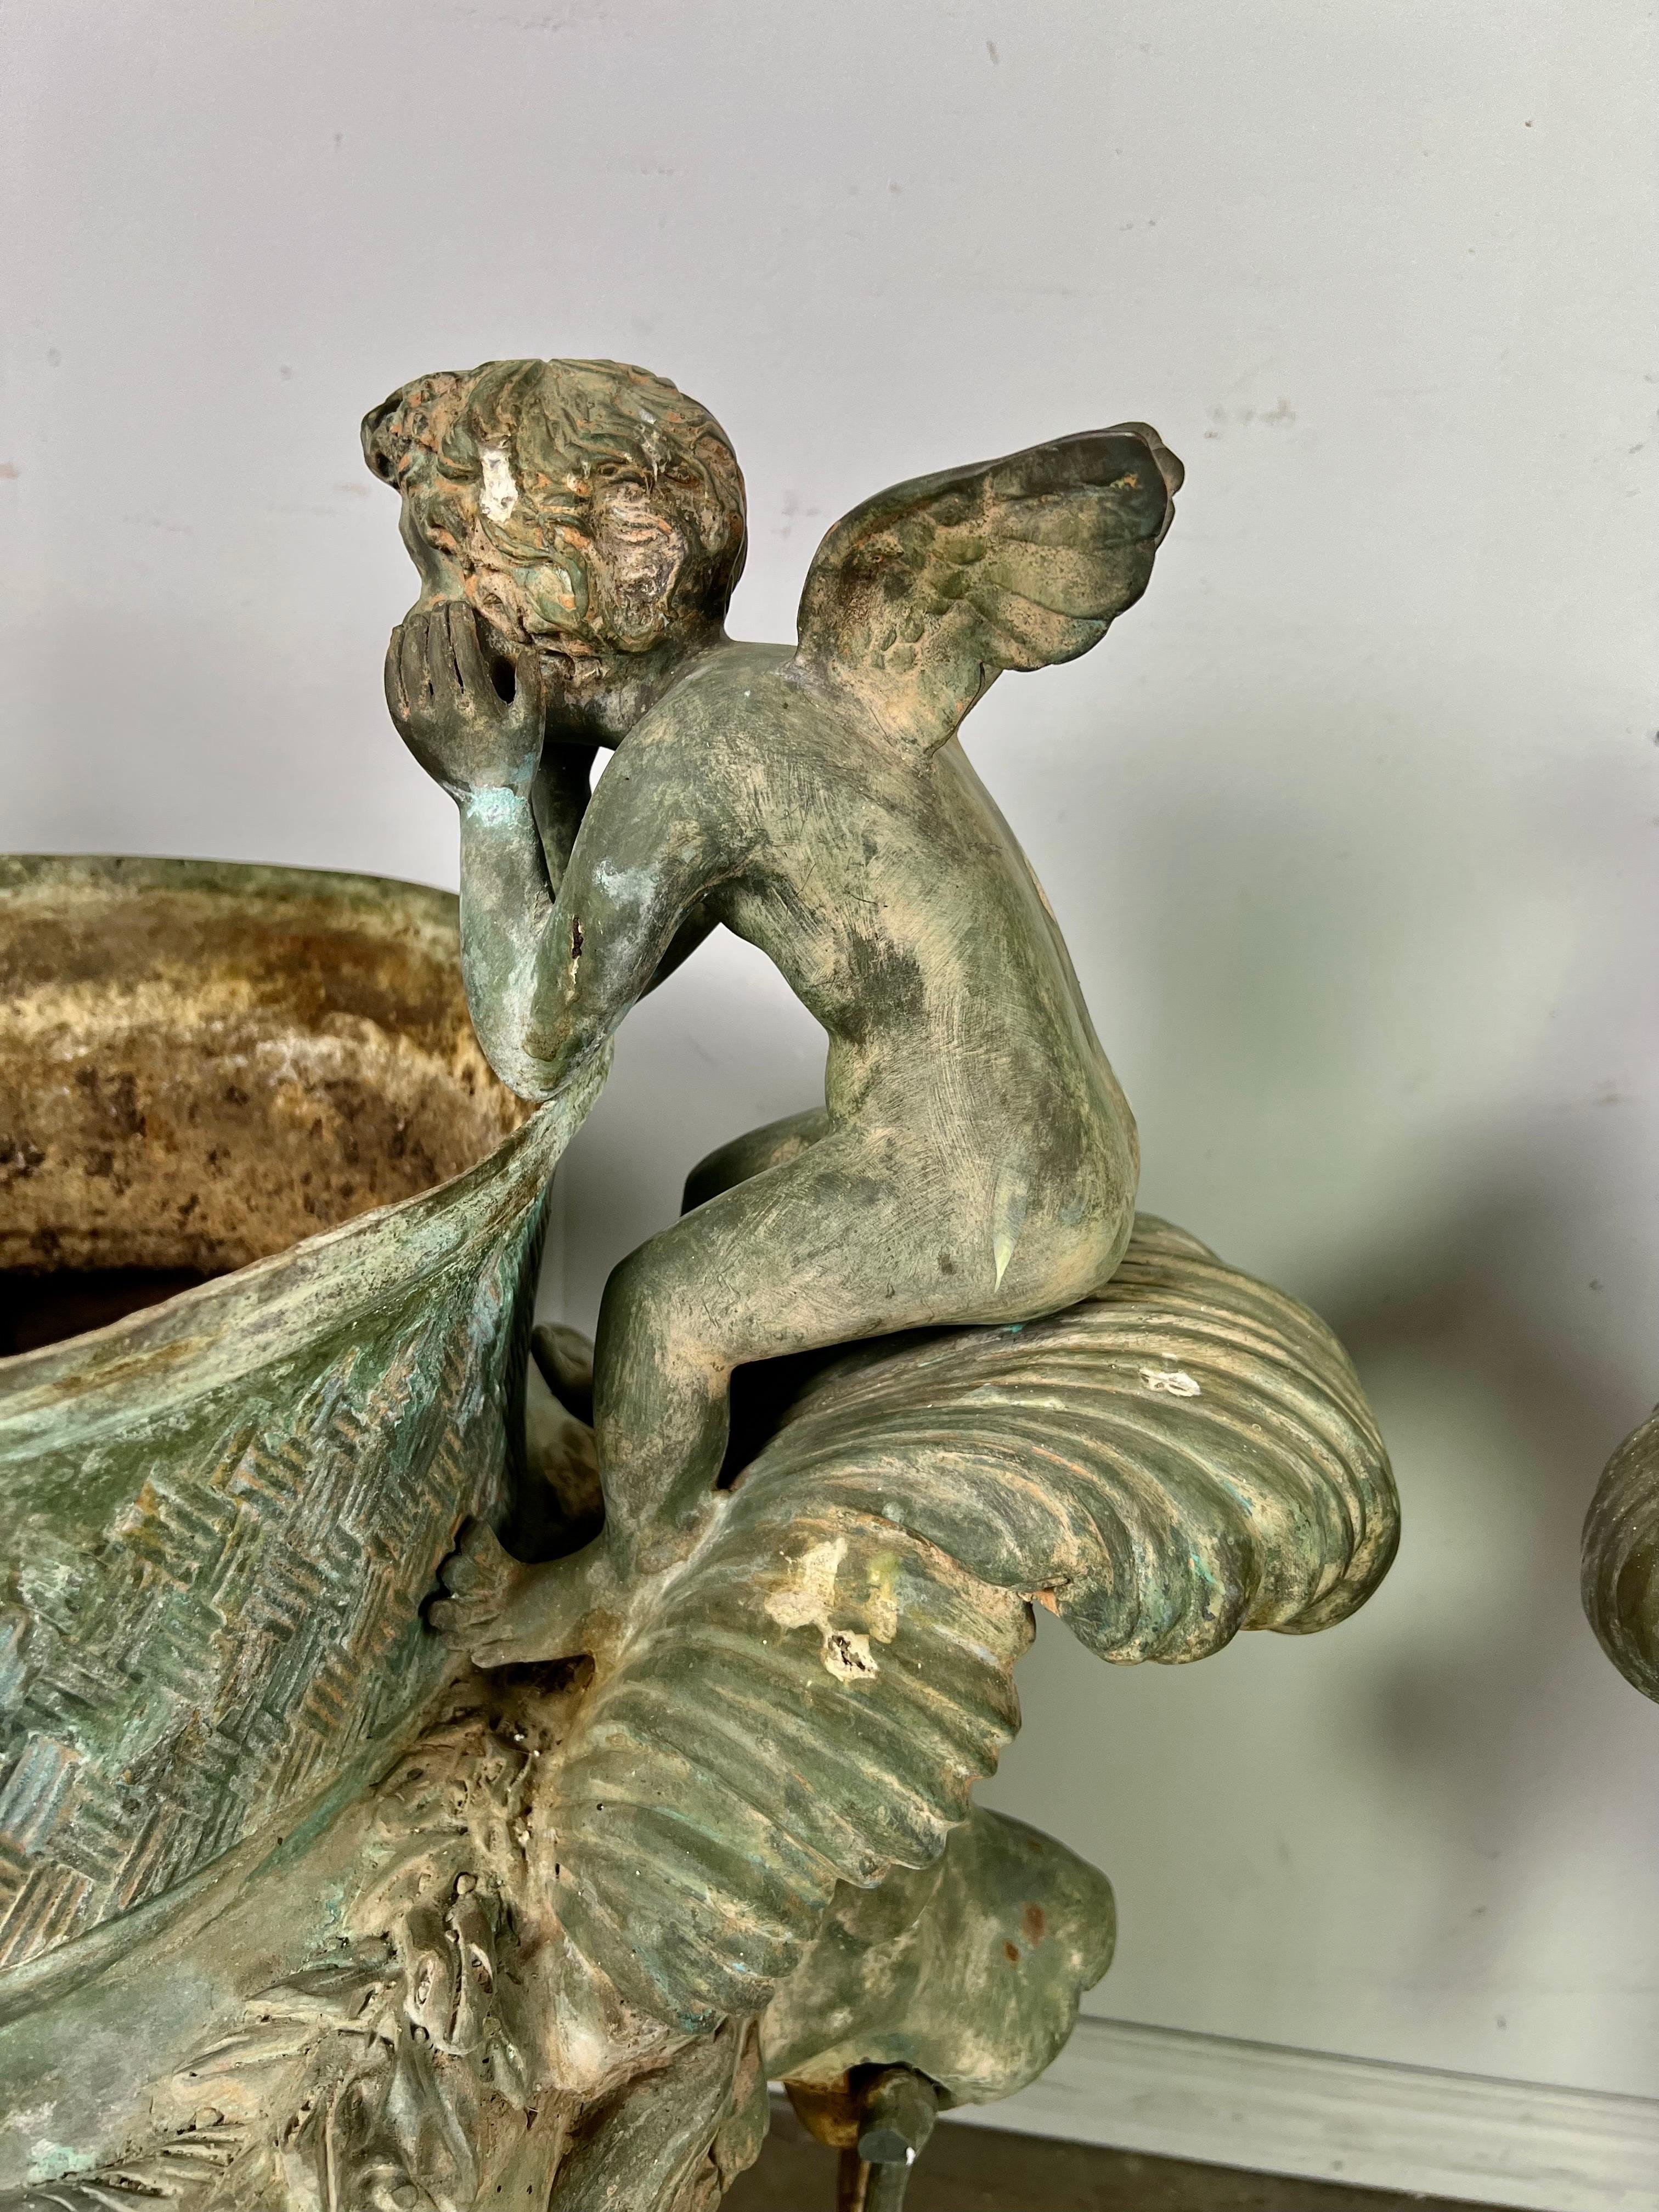 Monumental size pair of French Bronze Planters with Cherubs. They are detailed with garlands of flowers, acanthus leaves, and two exquisite cherubs gazing at each other. The patina on these planters is unbelievable. They have the most beautiful